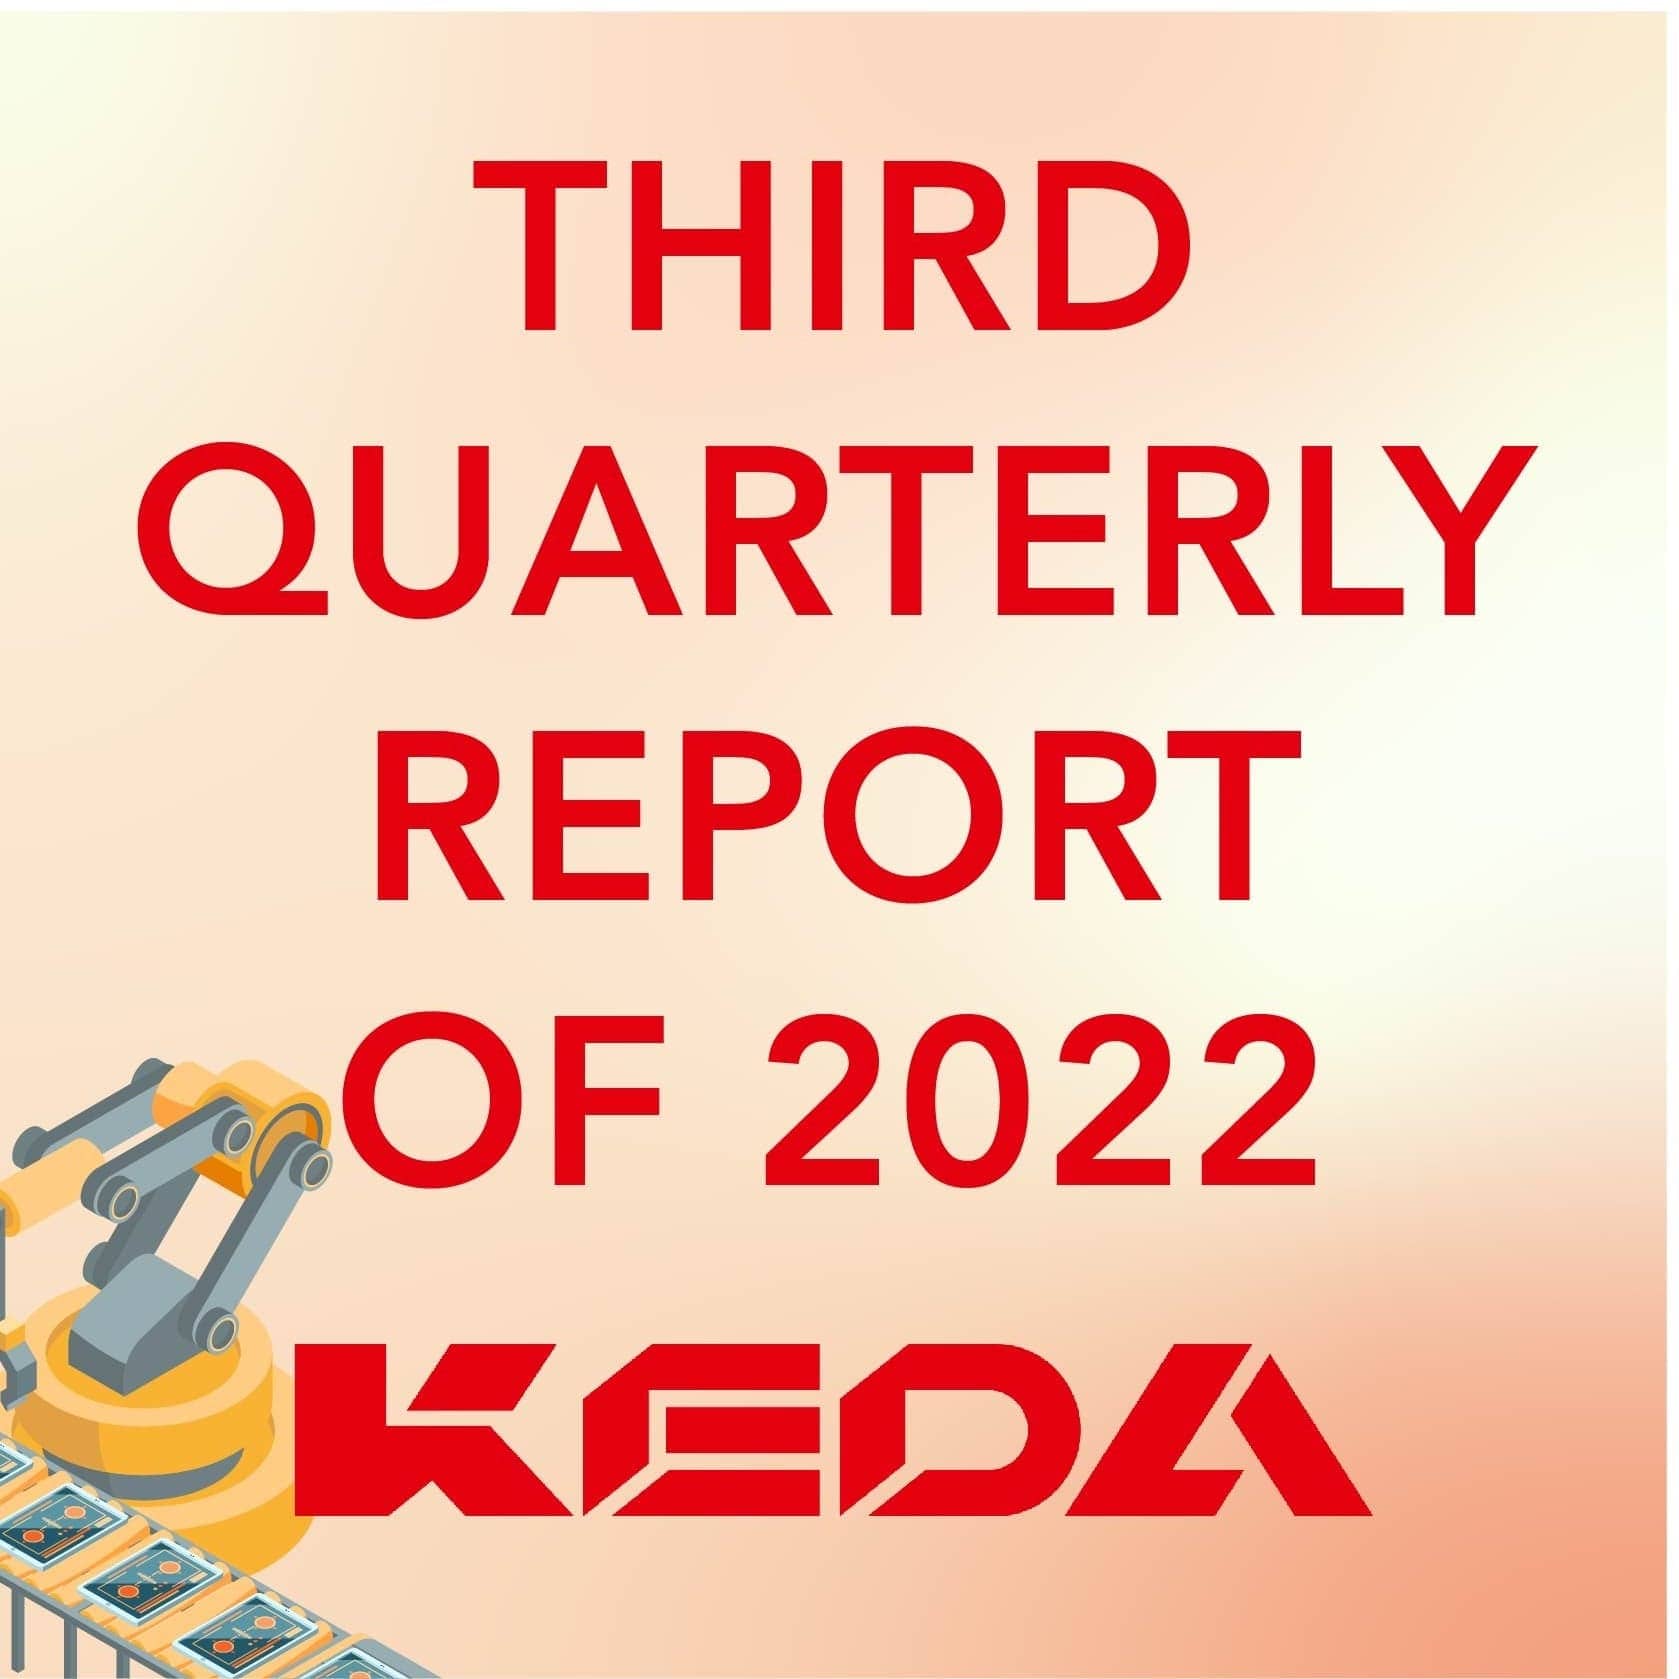 Financial Highlights of Third Quarterly Report of 2022